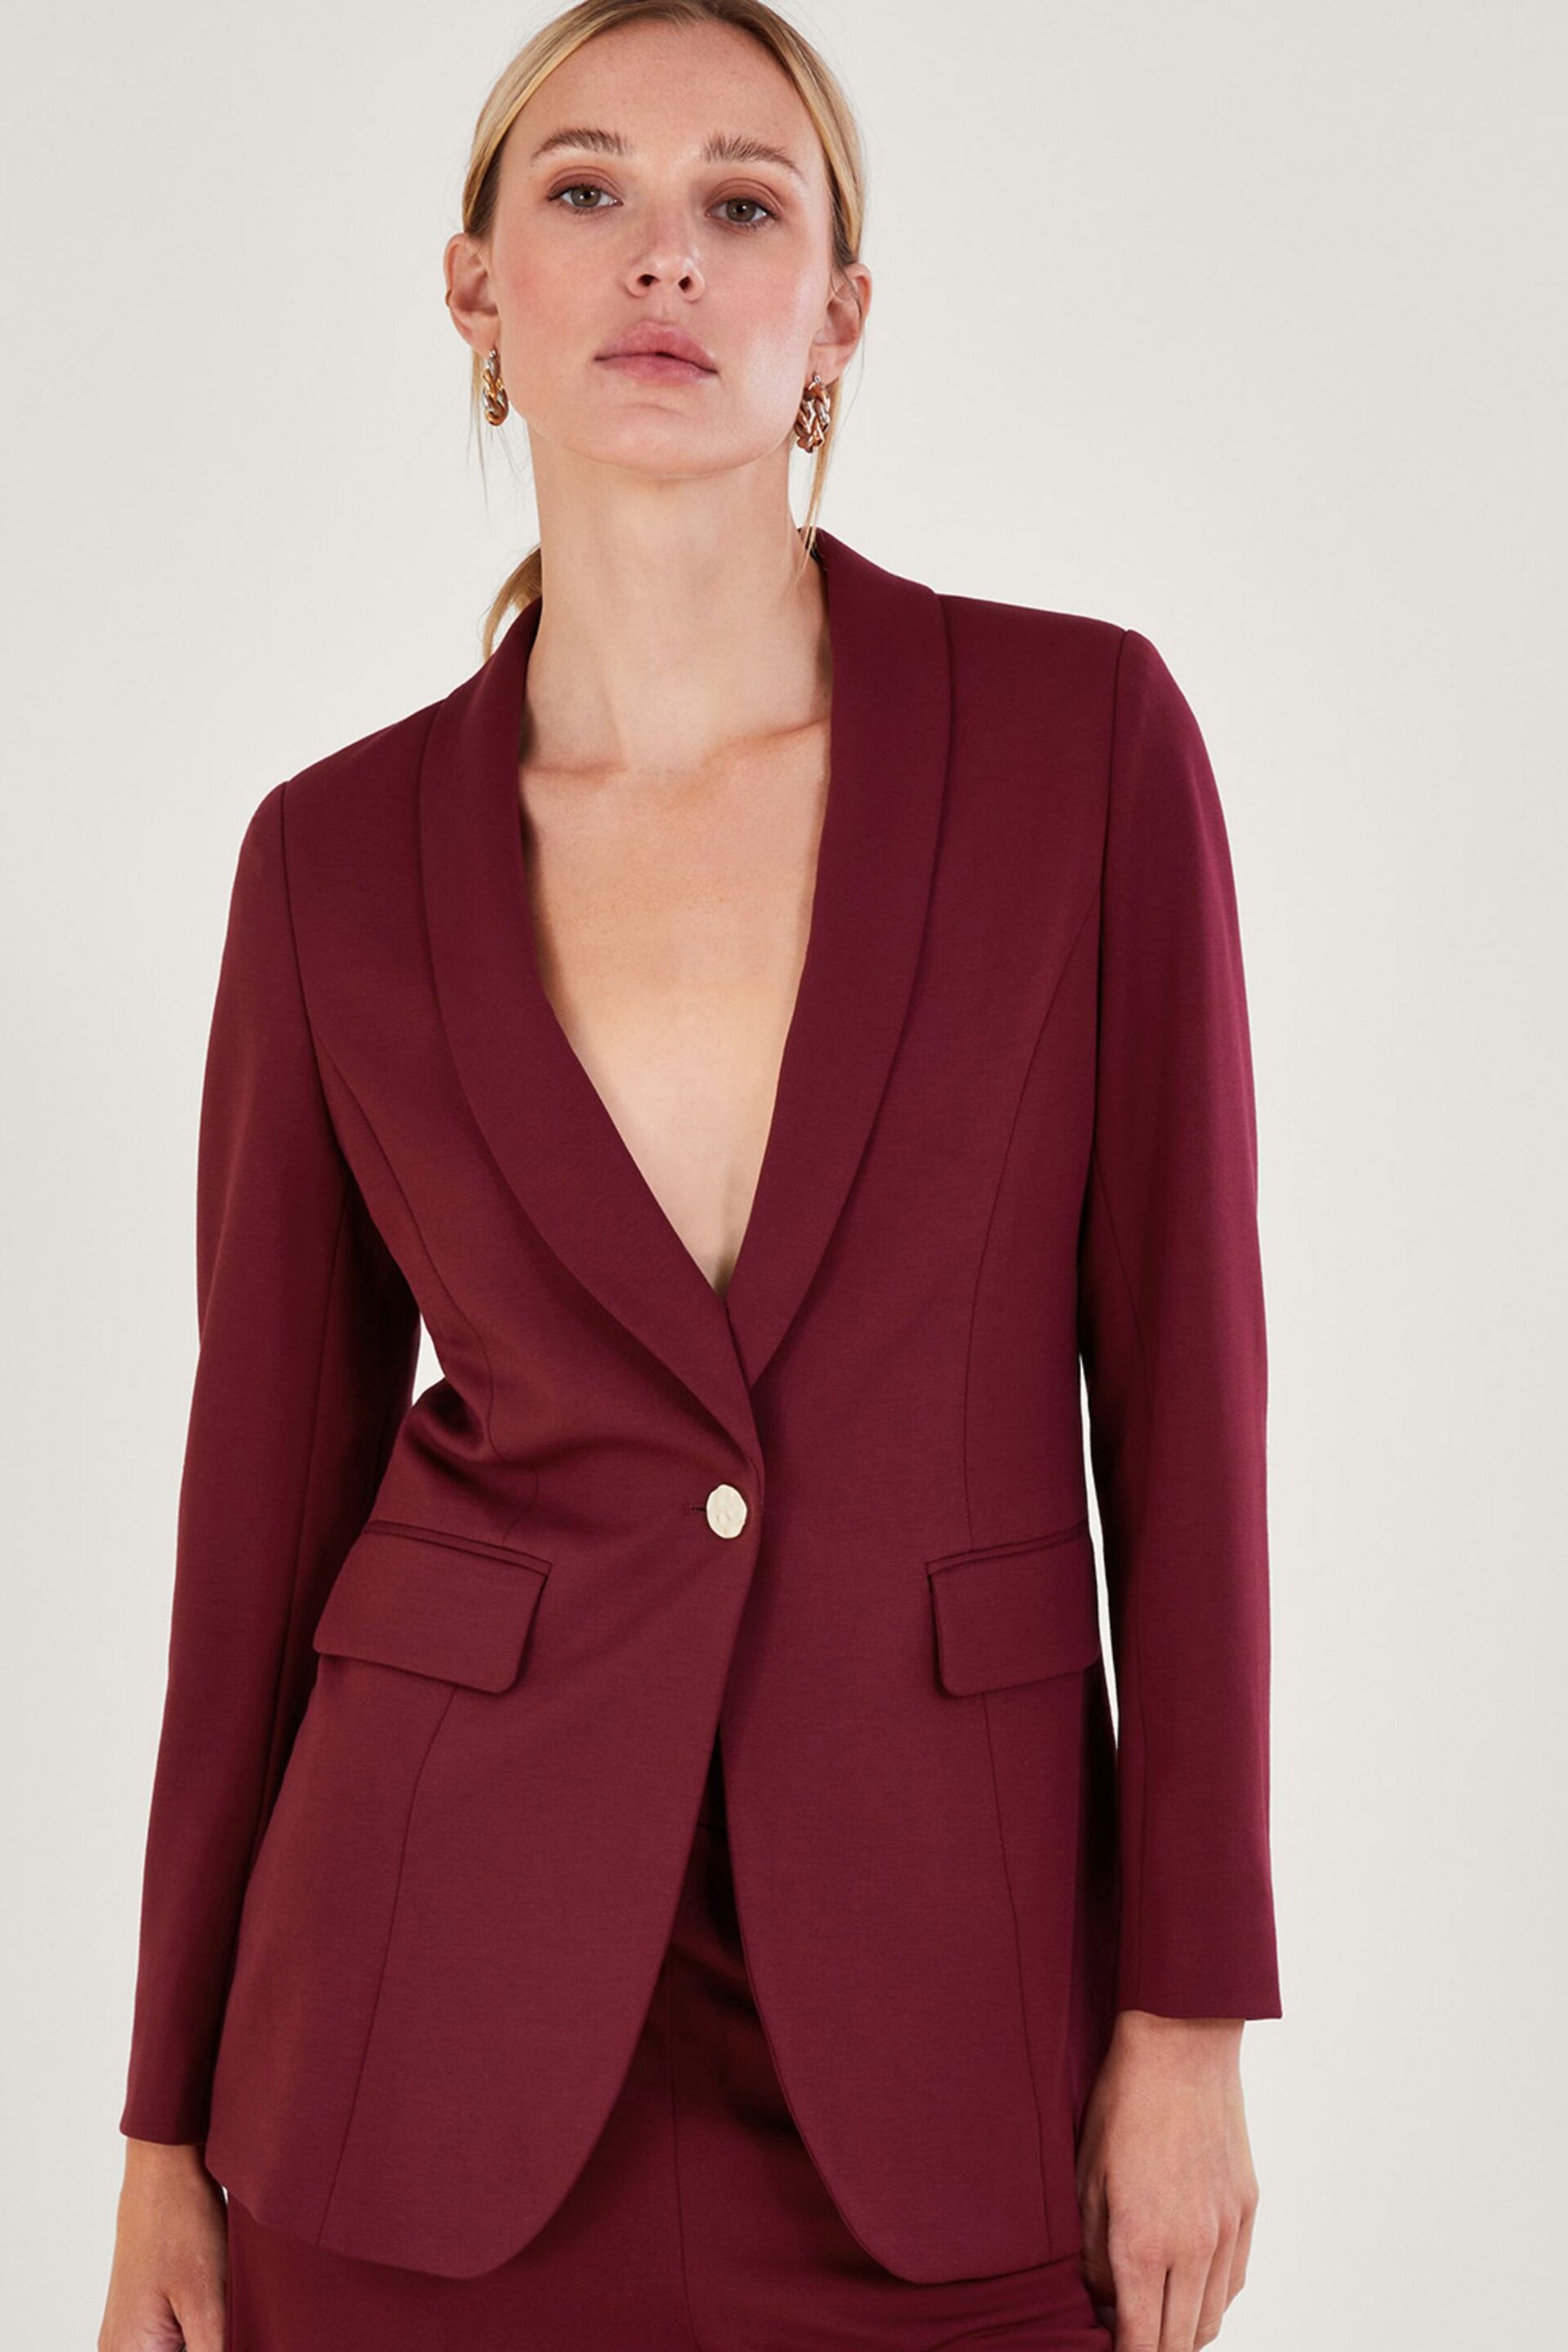 Monsoon Red Paige Single-Breasted Ponte Blazer - Image 1 of 3